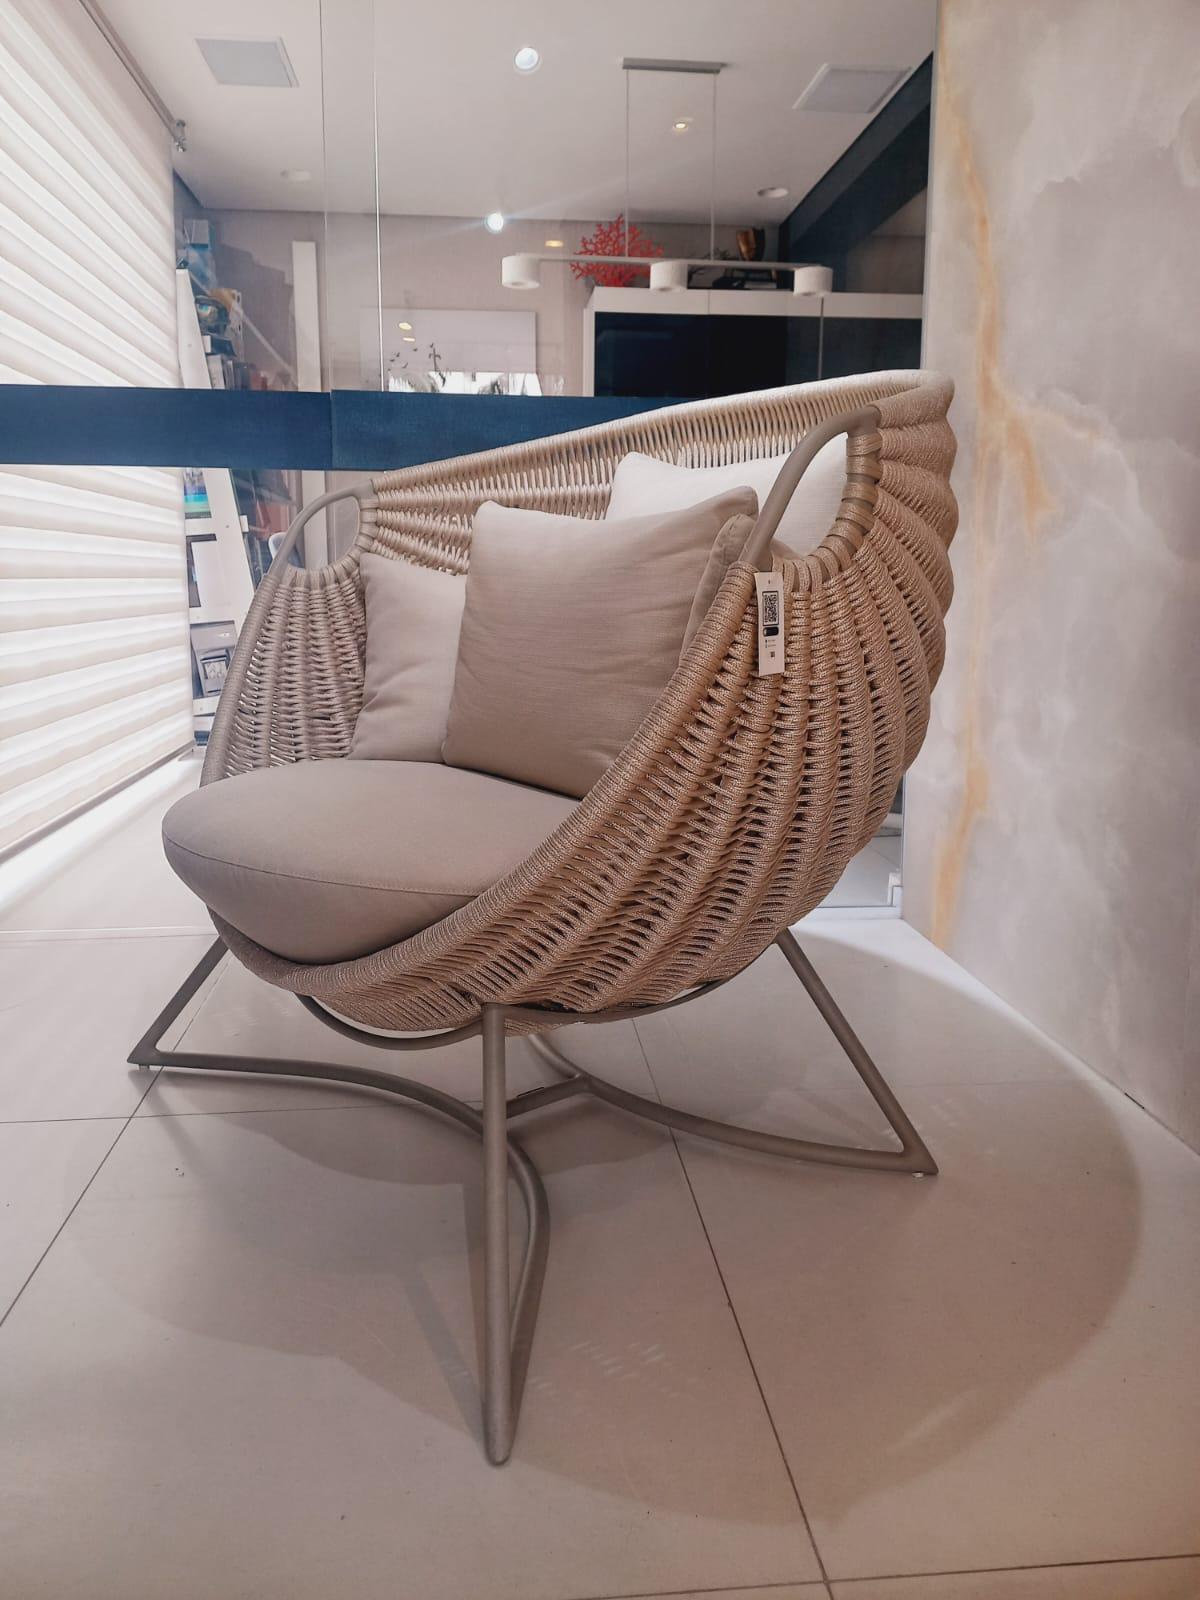 The design is eye-catching: vigorous, elegant and sophisticated at the same time. Every detail of the Tatu Armchair marks the originality of the piece. The concave shape, the elaborate handcrafted weave, the lightness of the structure forged in